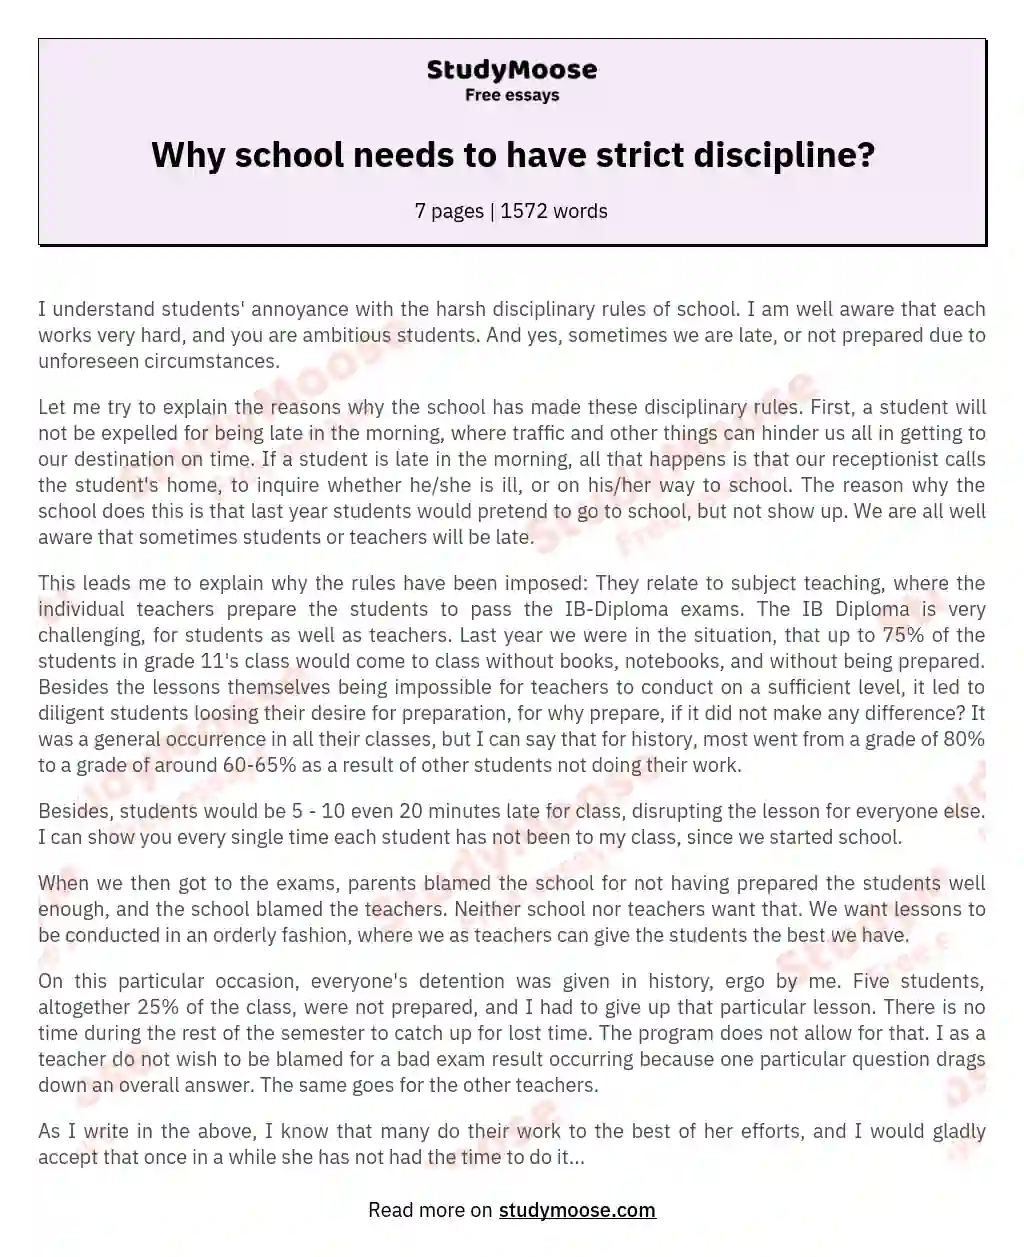 Why school needs to have strict discipline?